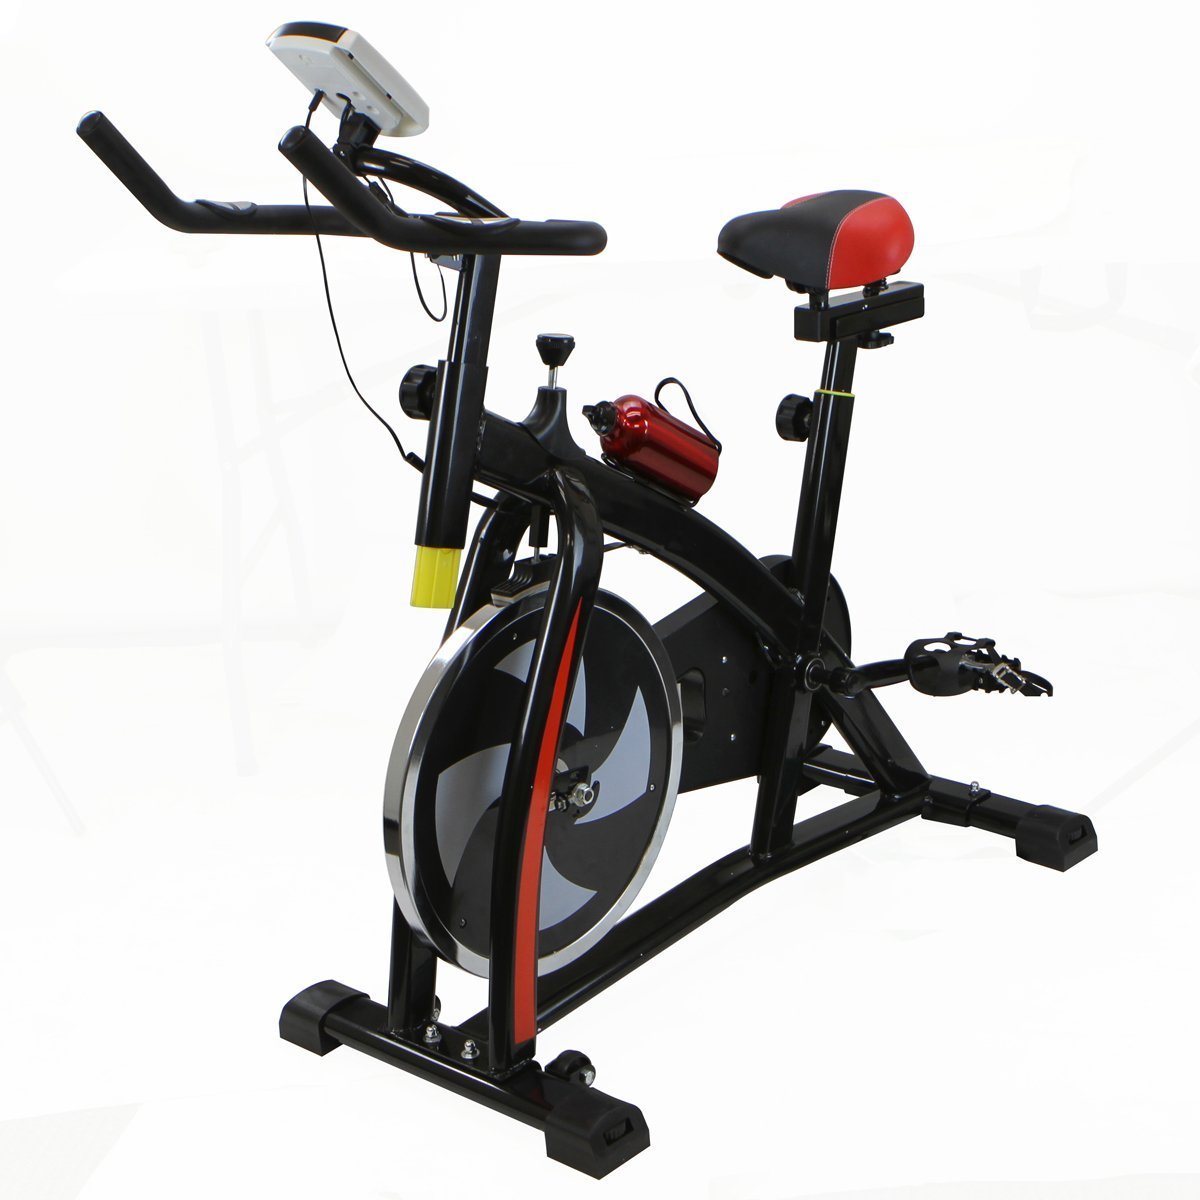 XtremepowerUS Indoor Cycle Trainer Fitness Bicycle Stationary